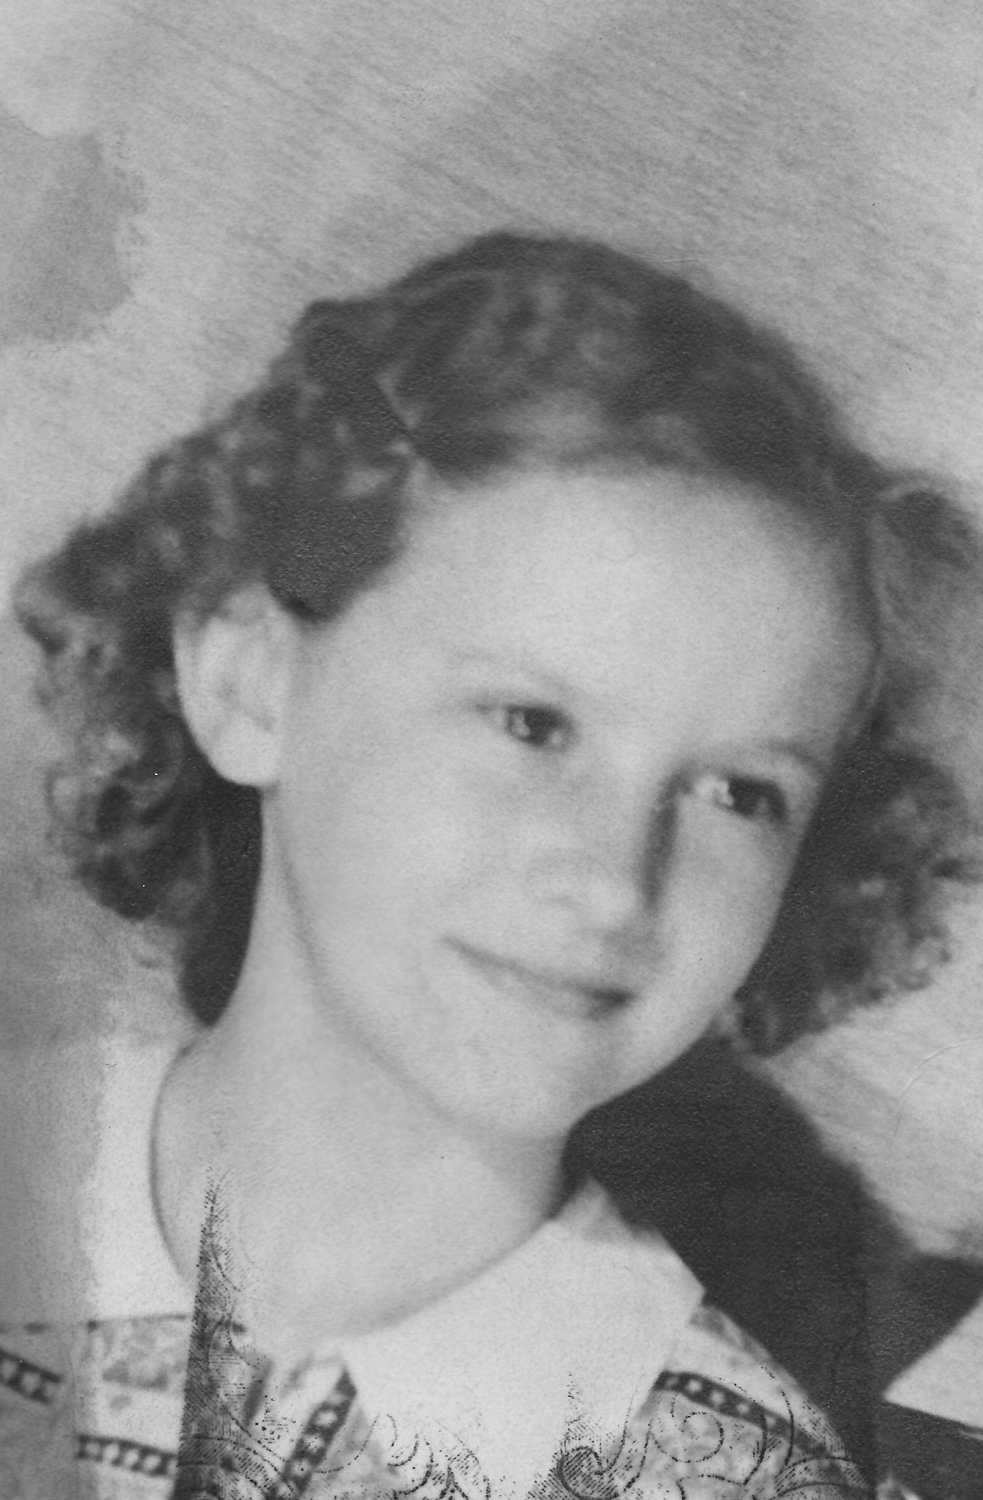 Bernice, eleven years old, with her first perm